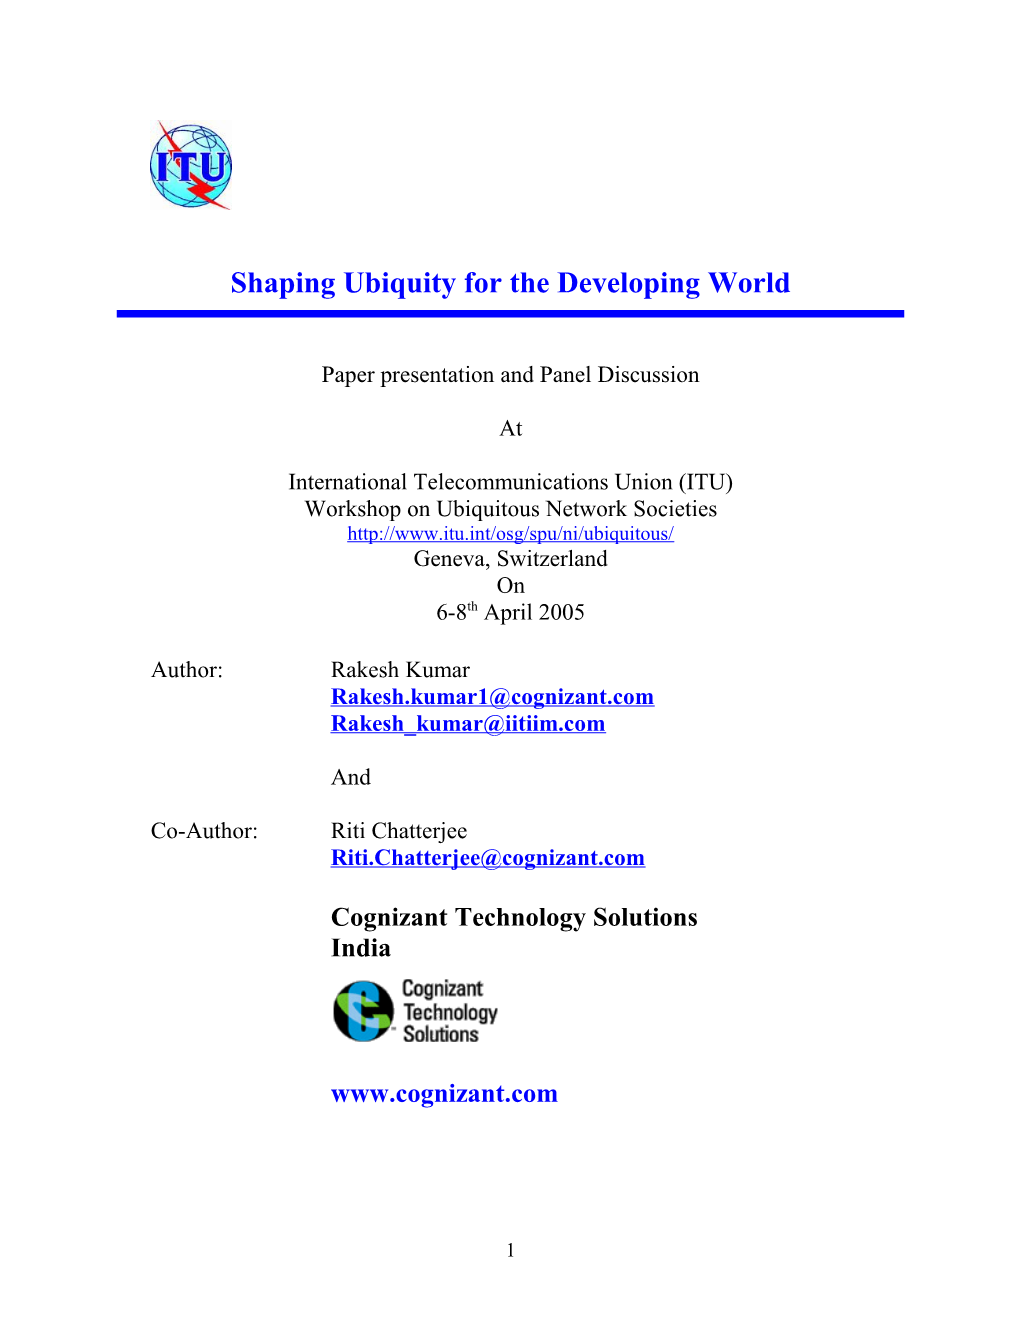 Shaping Ubiquitous Technology For Developing Countries